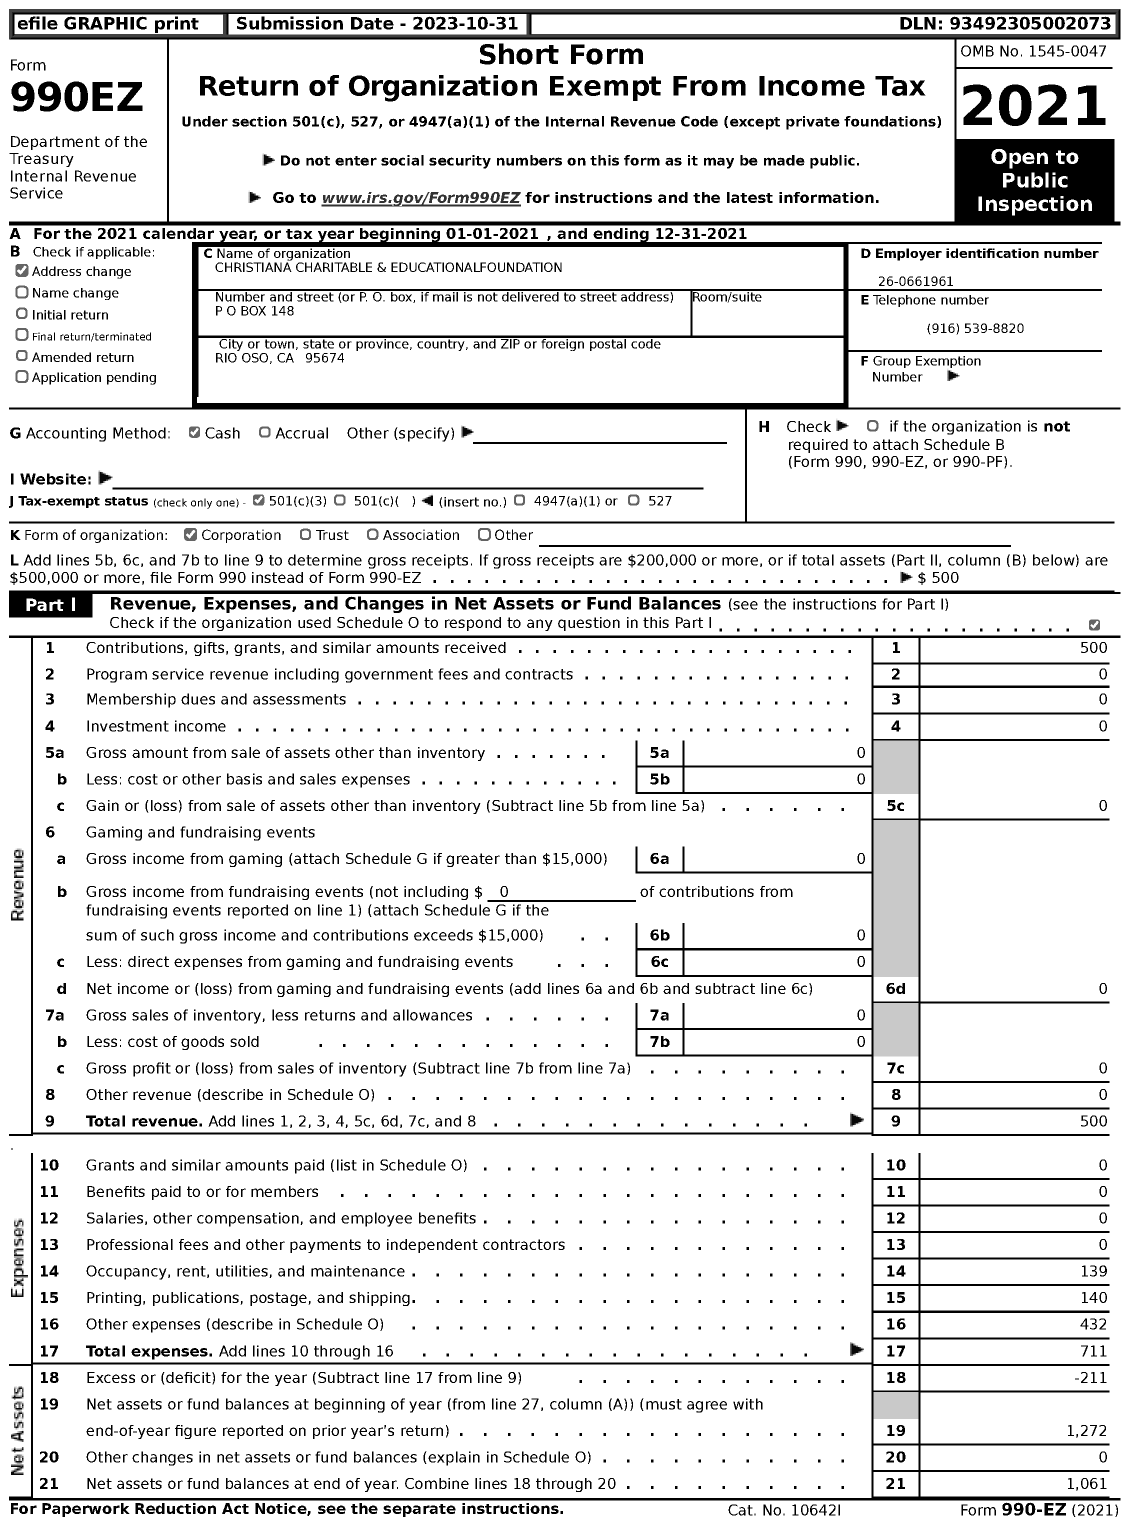 Image of first page of 2021 Form 990EZ for Christiana Charitable and Educationalfoundation